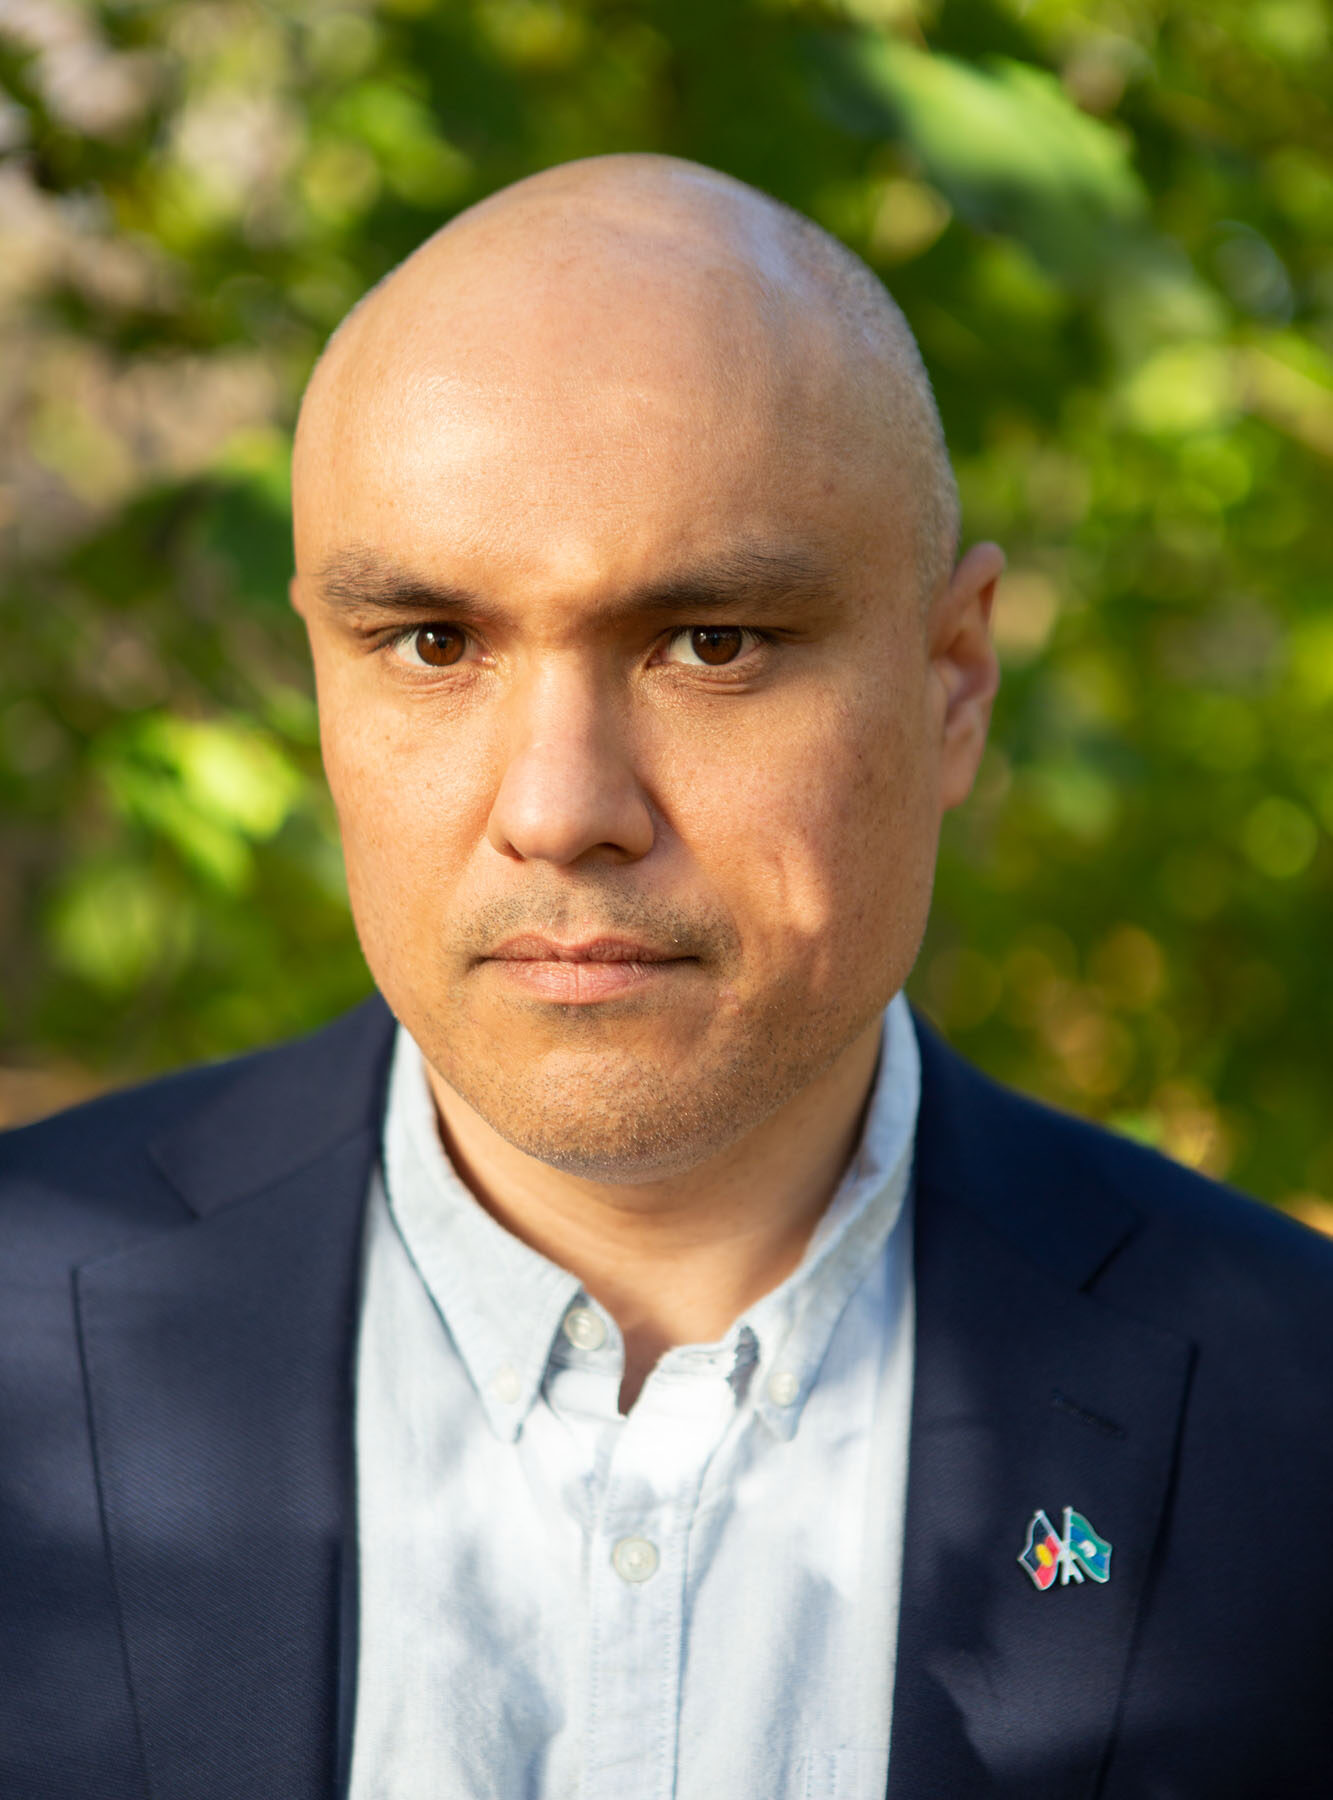 A head-and-shoulders photograph of a bald man with light brown skin looking directly at the camera without smiling